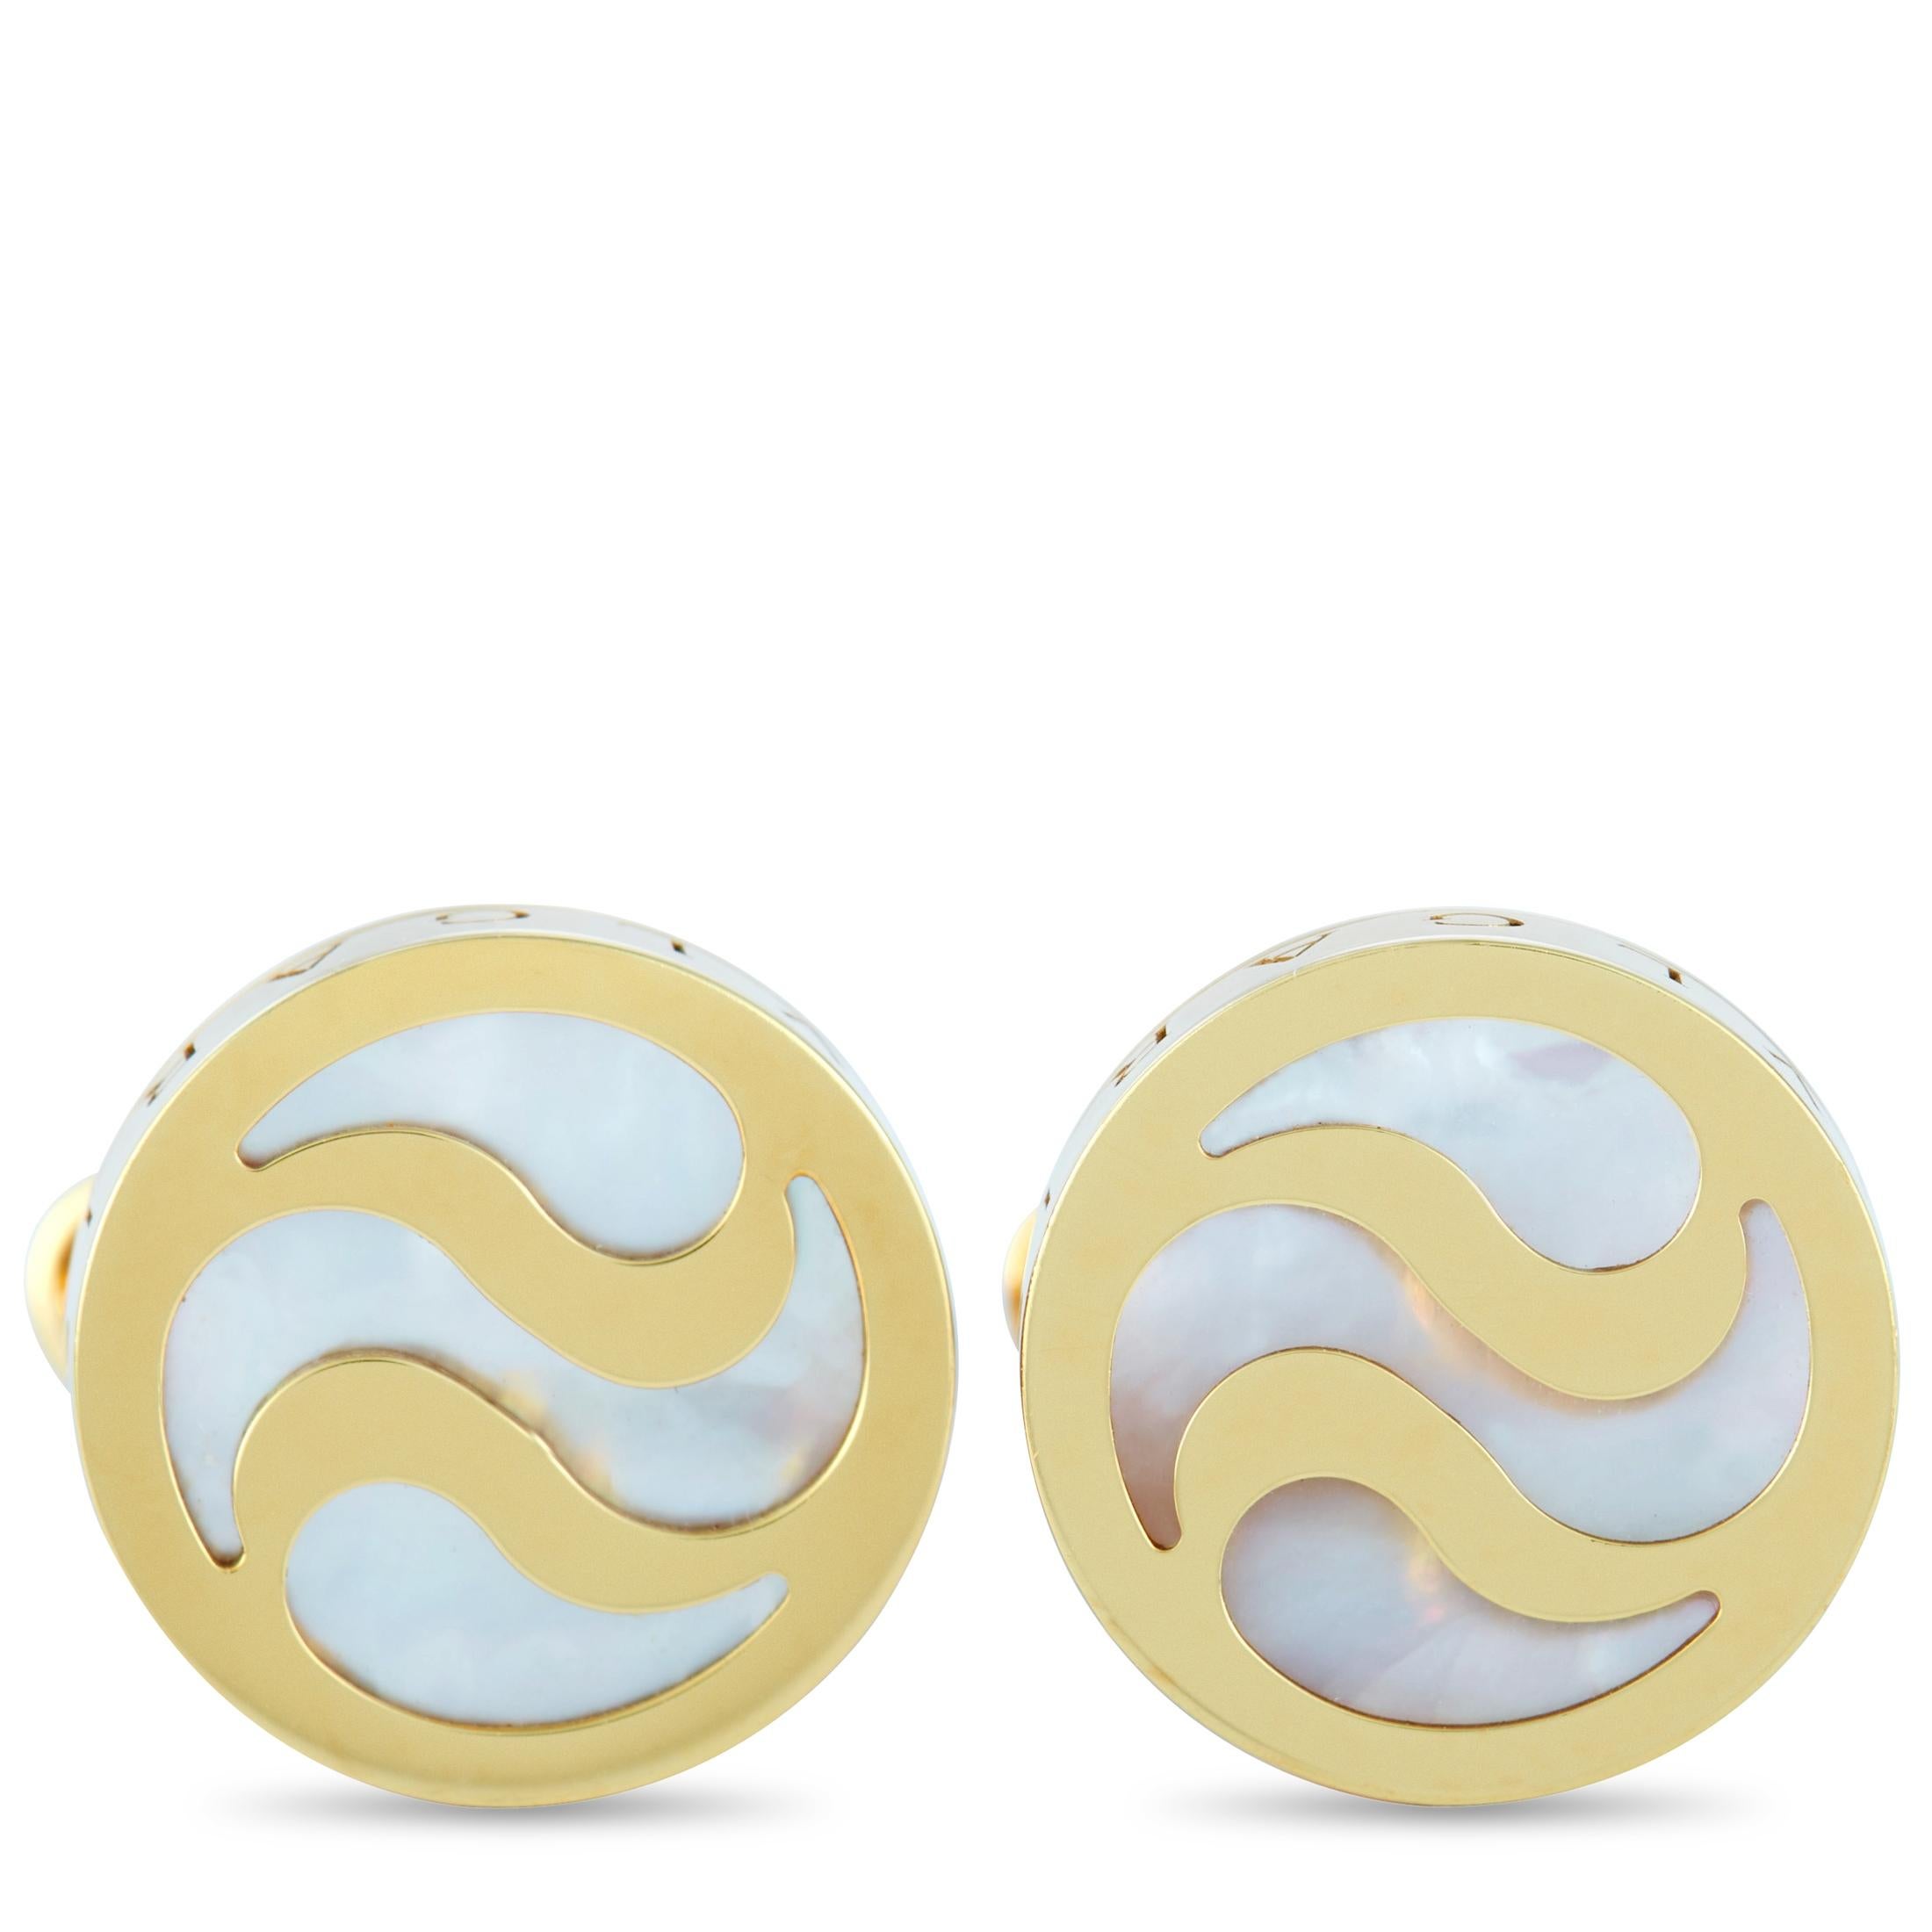 These Bvlgari cufflinks are made out of 18K yellow gold and mother of pearl and each of the two weighs 8.35 grams. The cufflinks measure 0.60” in length and 0.60” in width.
 
 The pair is offered in estate condition and includes the manufacturer’s